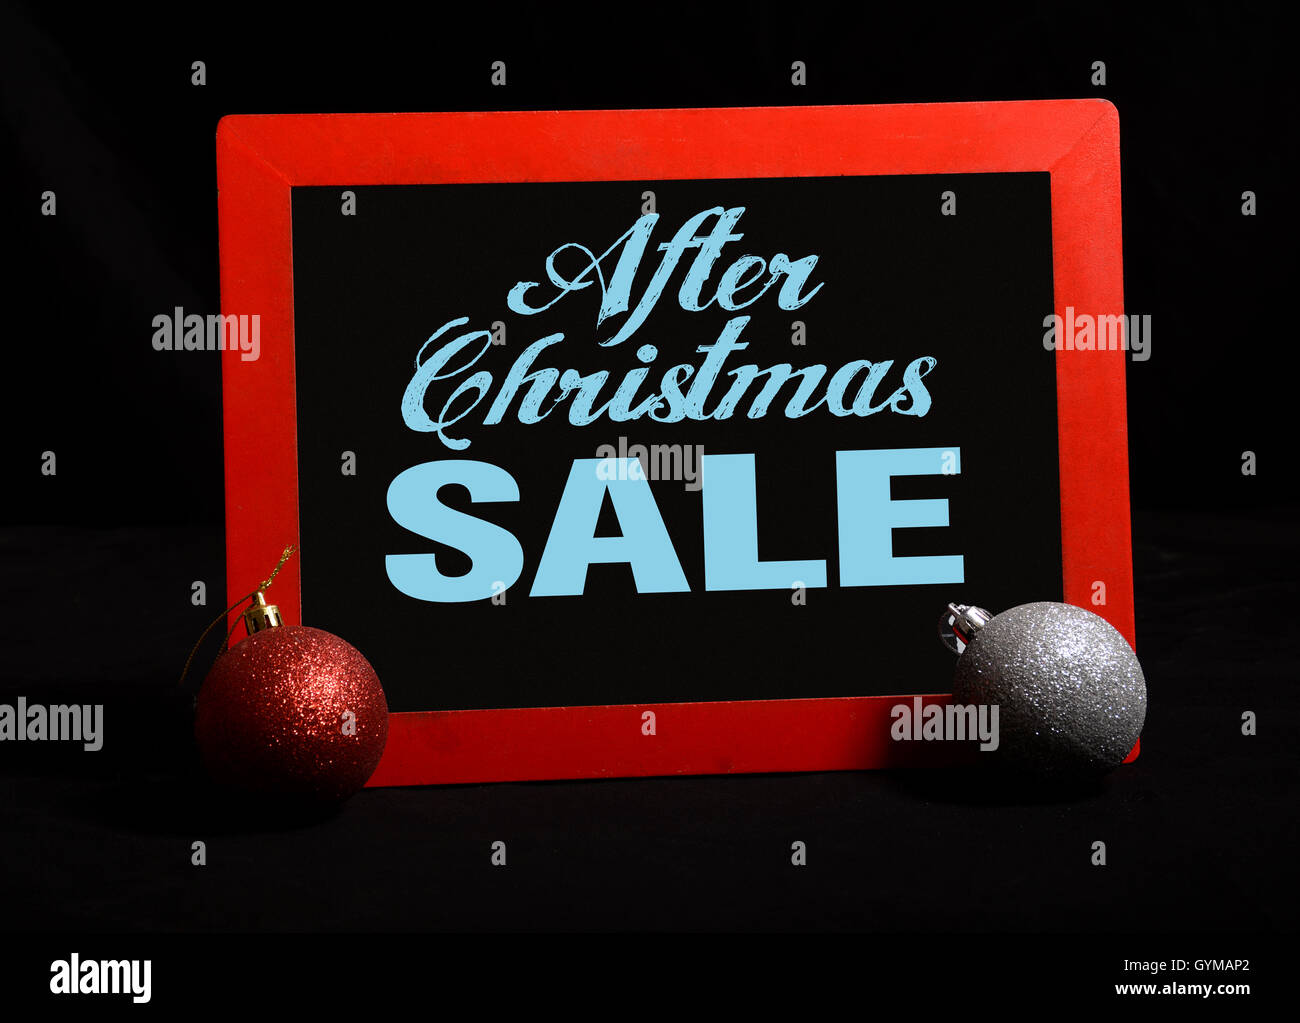 After Christmas Sale banner on chalkboard with balls. Stock Photo